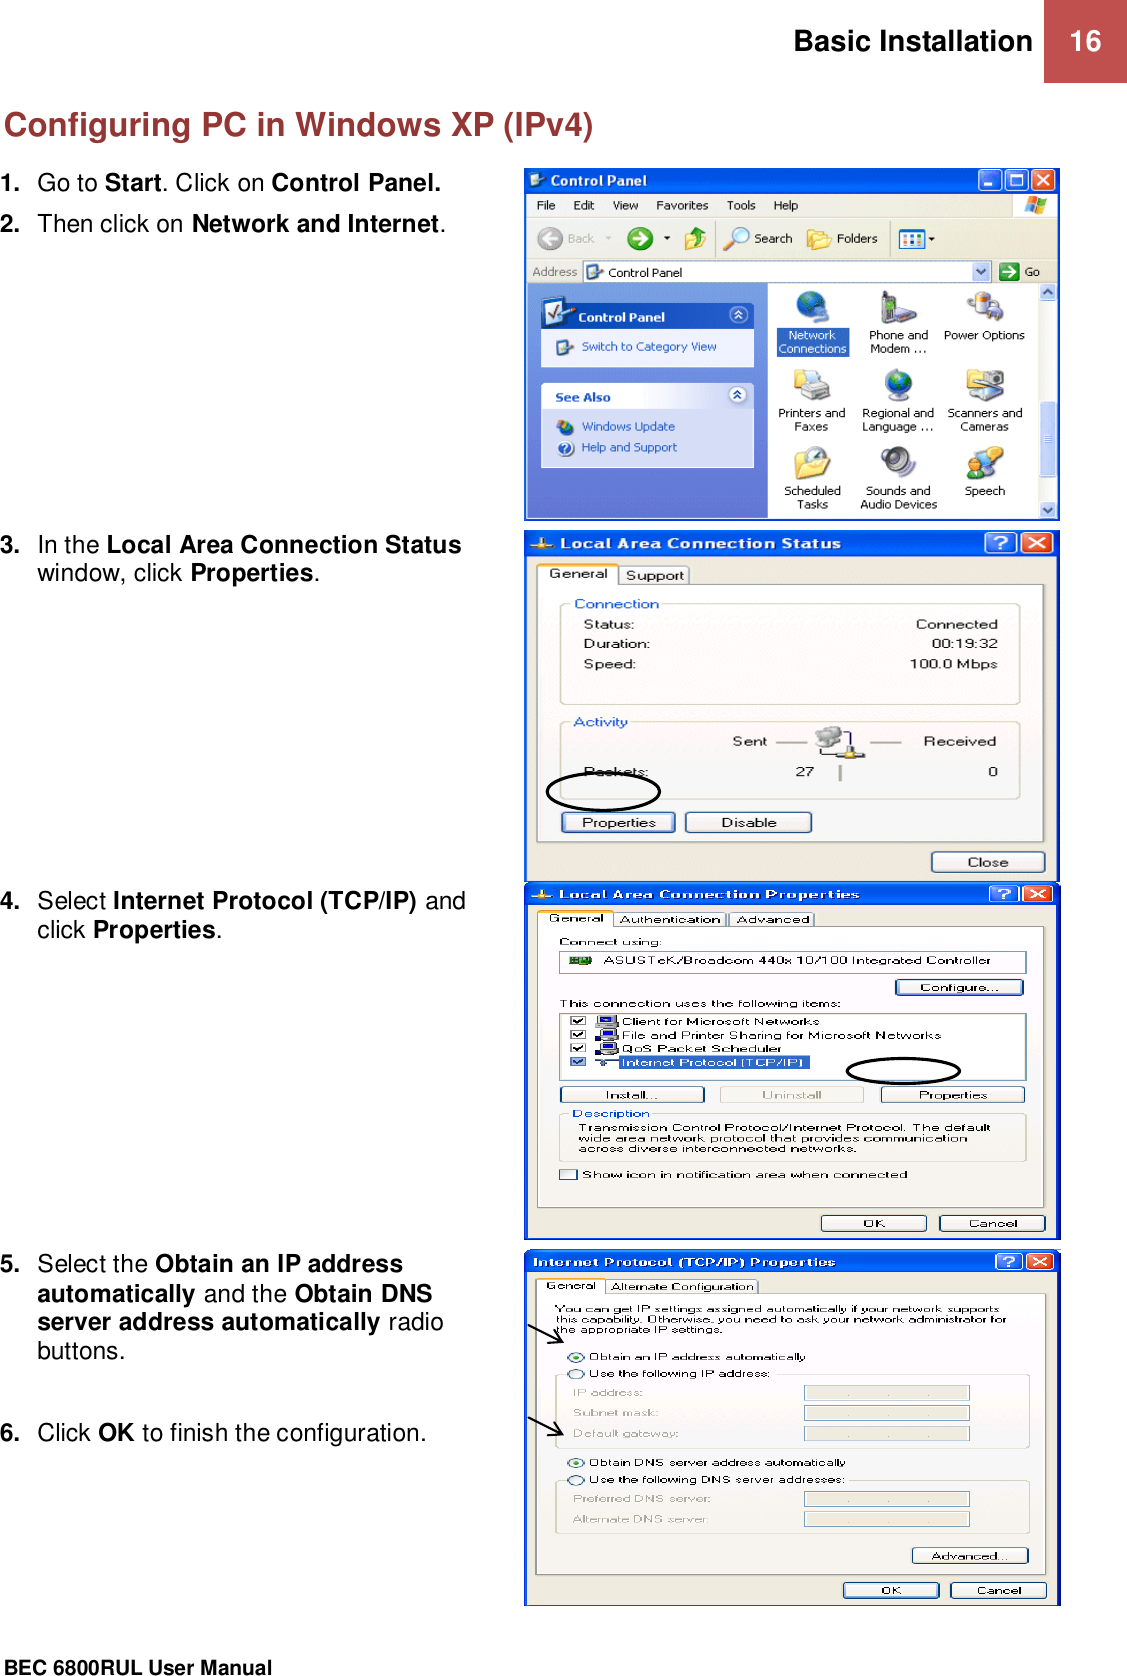 Basic Installation 16                                                 BEC 6800RUL User Manual  Configuring PC in Windows XP (IPv4) 1. Go to Start. Click on Control Panel. 2. Then click on Network and Internet.   3. In the Local Area Connection Status window, click Properties.  4. Select Internet Protocol (TCP/IP) and click Properties.  5. Select the Obtain an IP address automatically and the Obtain DNS server address automatically radio buttons.  6. Click OK to finish the configuration.   